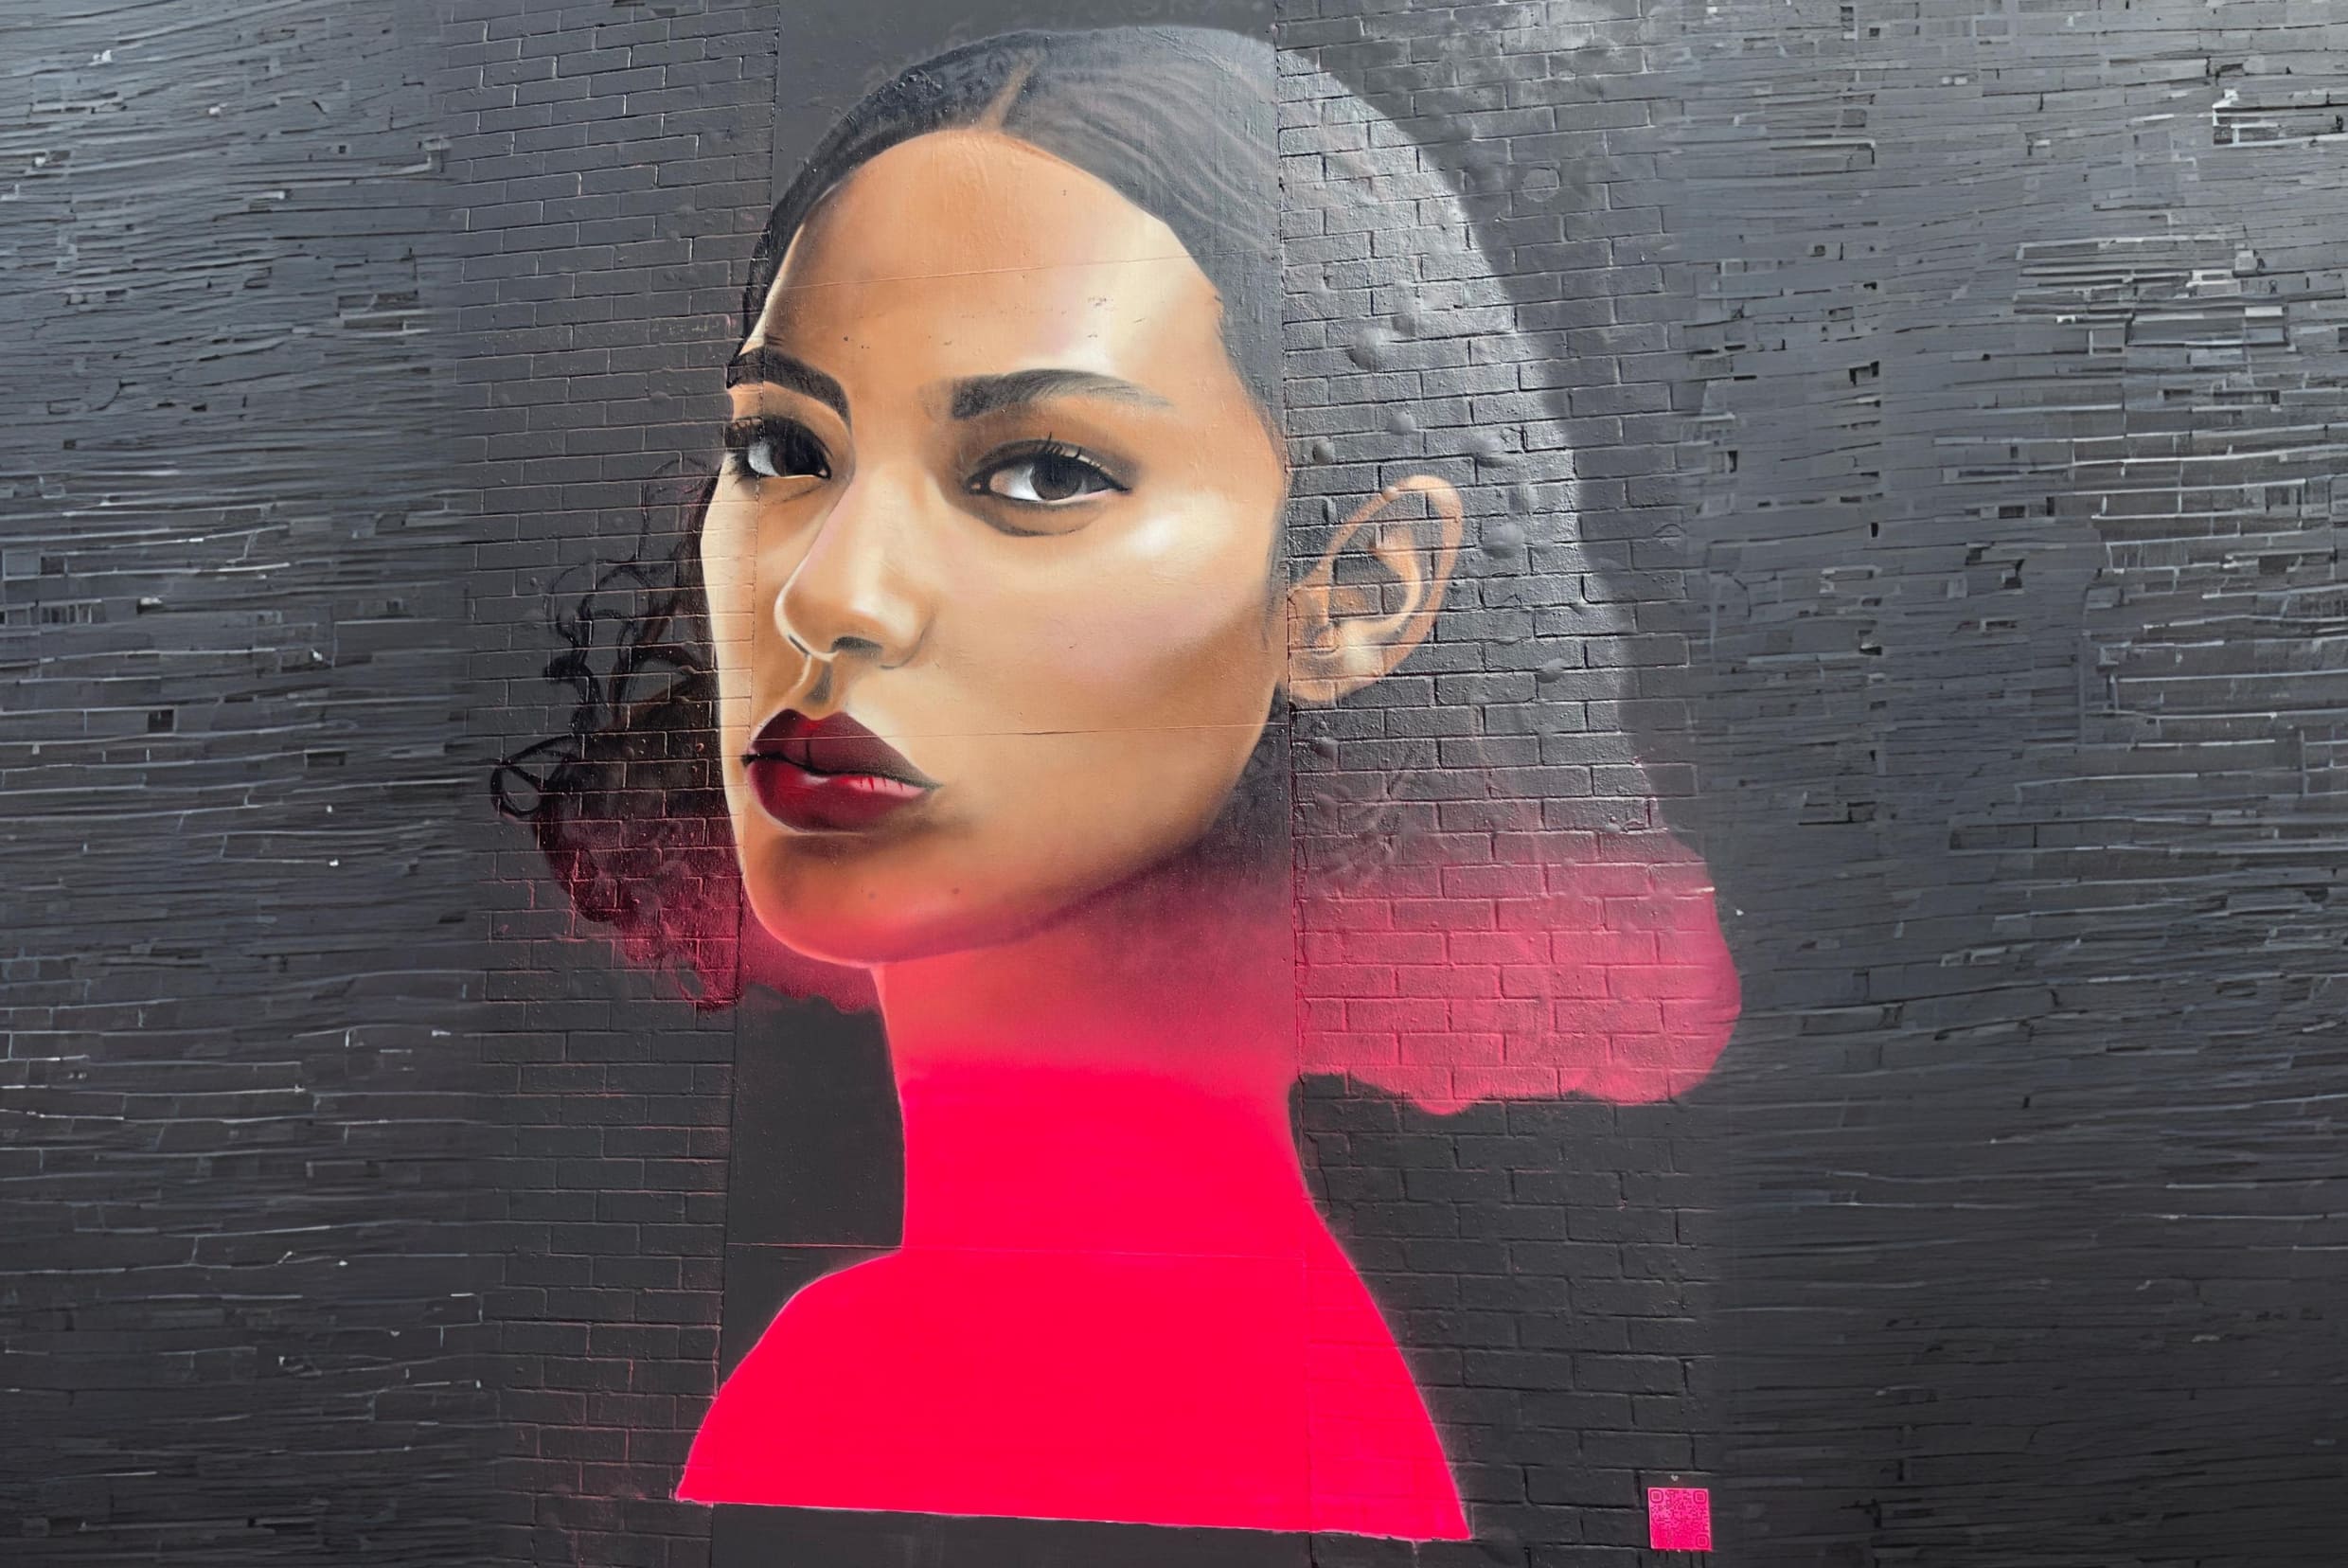 East London street art of a woman's face in black and red colours.